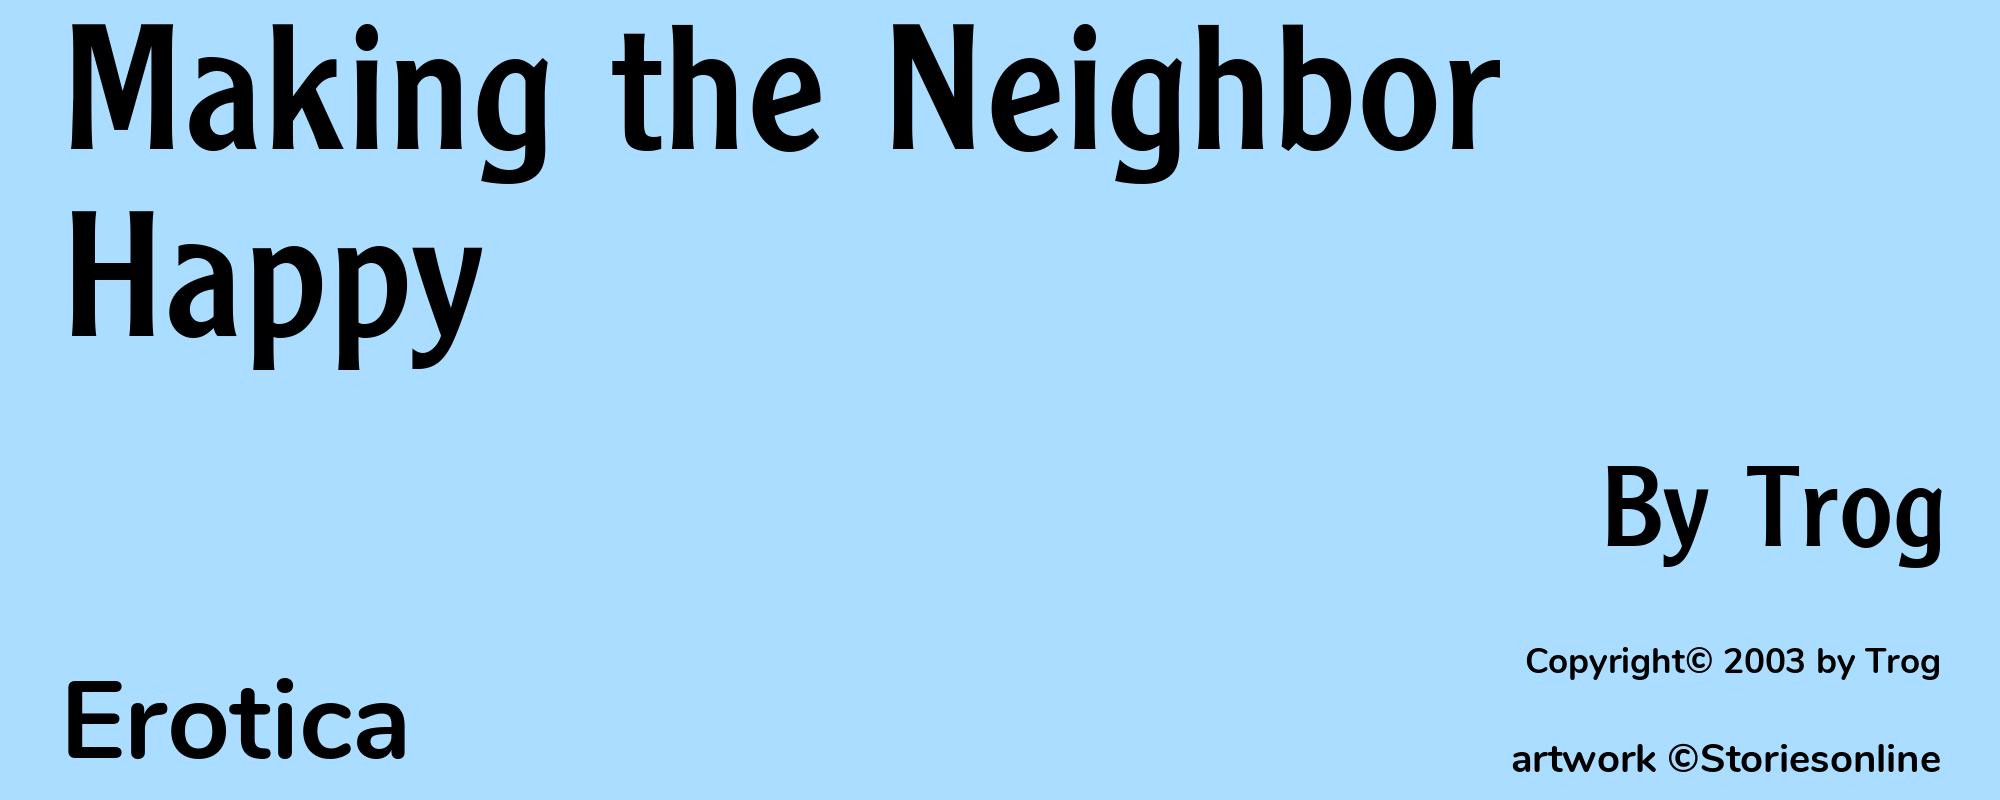 Making the Neighbor Happy - Cover